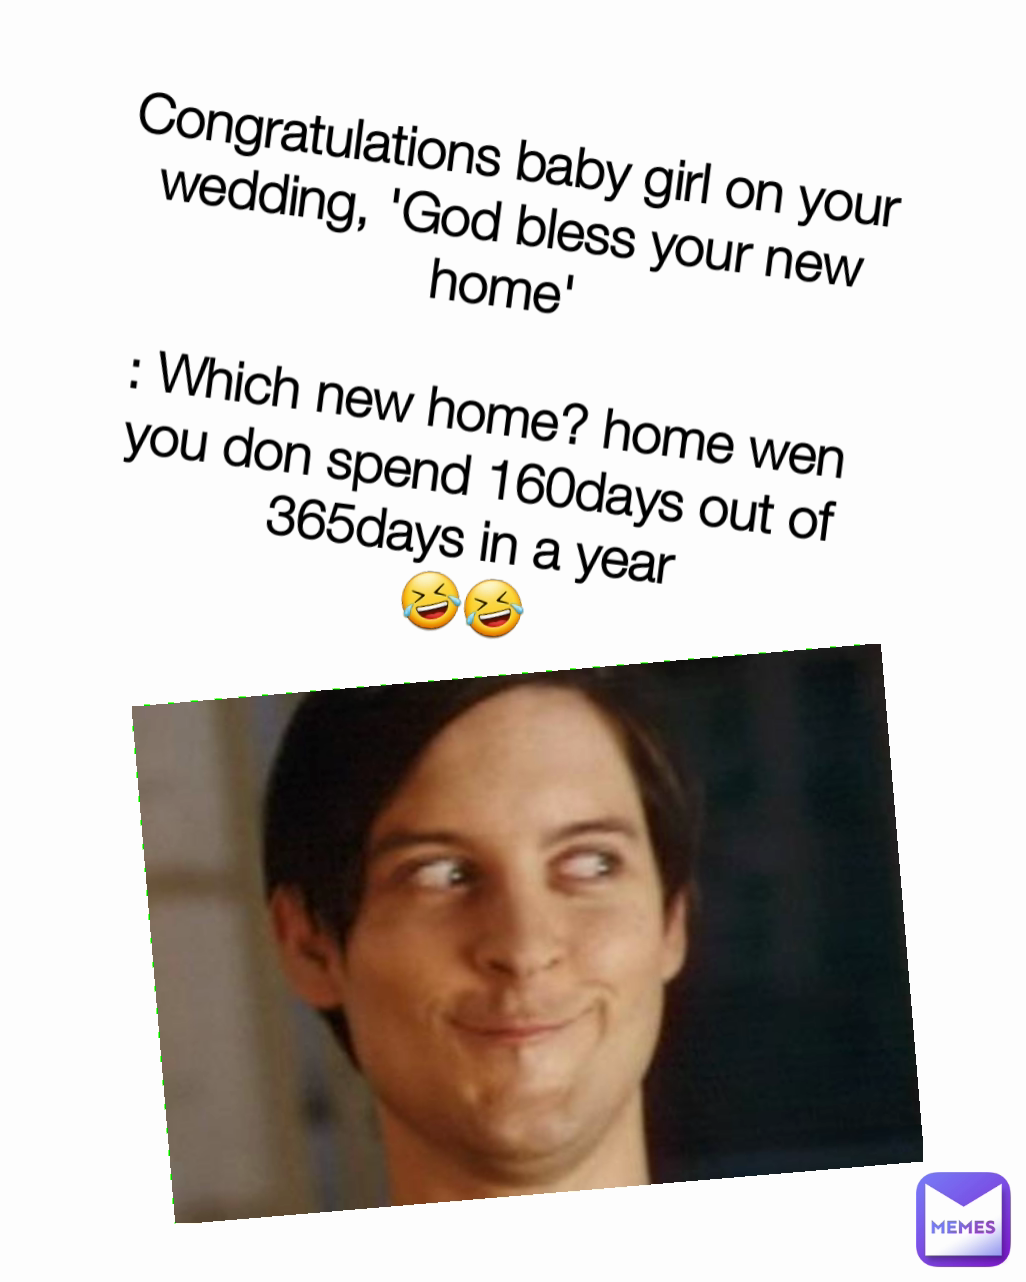 Congratulations baby girl on your wedding, 'God bless your new home'

: Which new home? home wen you don spend 160days out of 365days in a year
🤣🤣